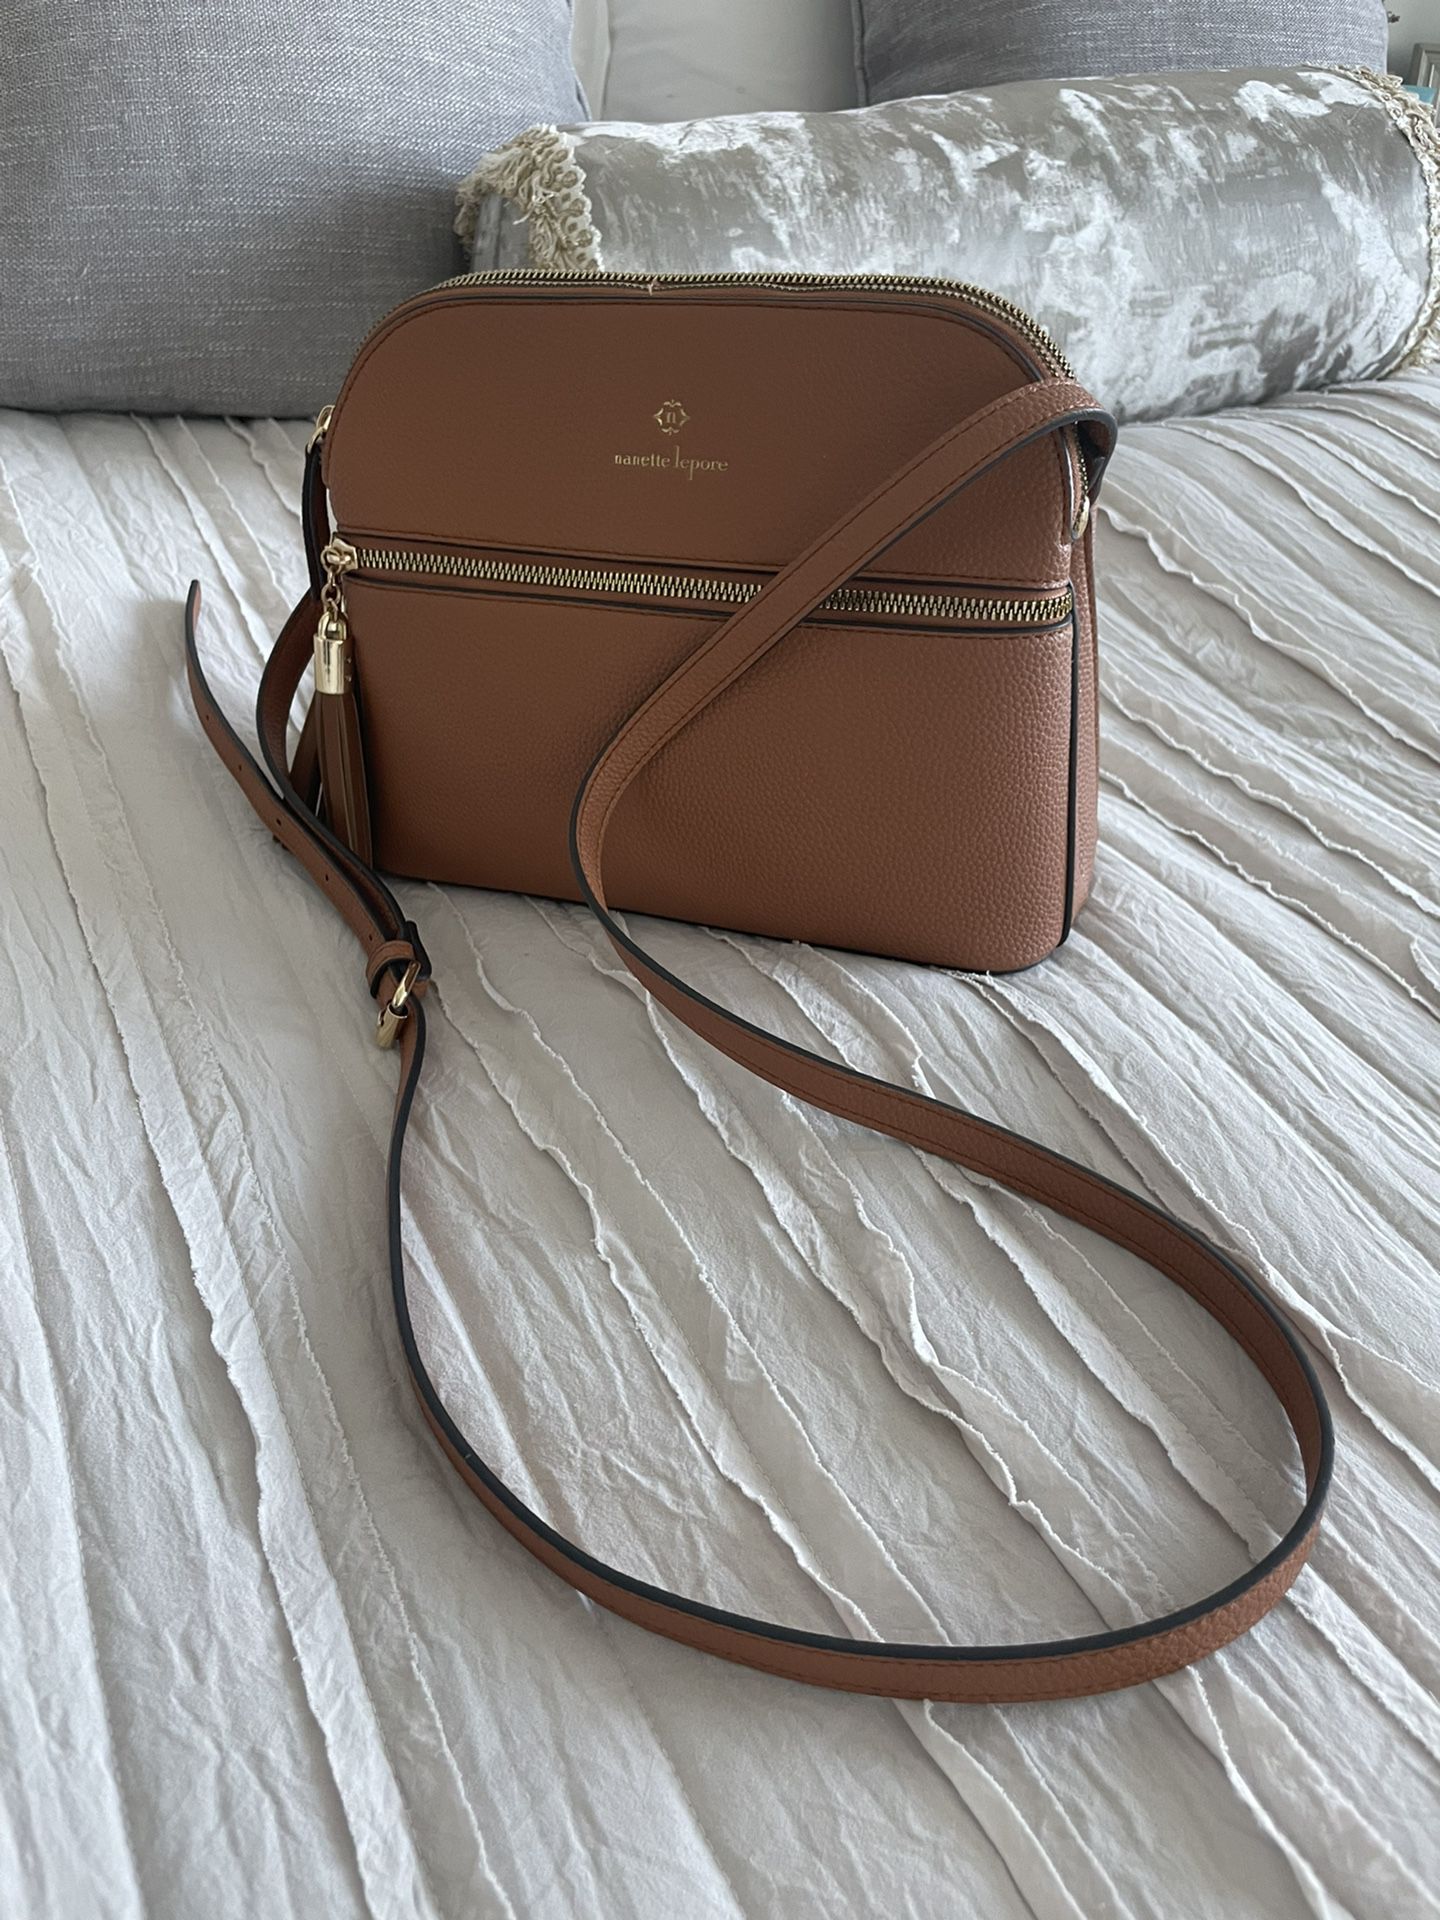 BAG for Sale in New York, NY - OfferUp